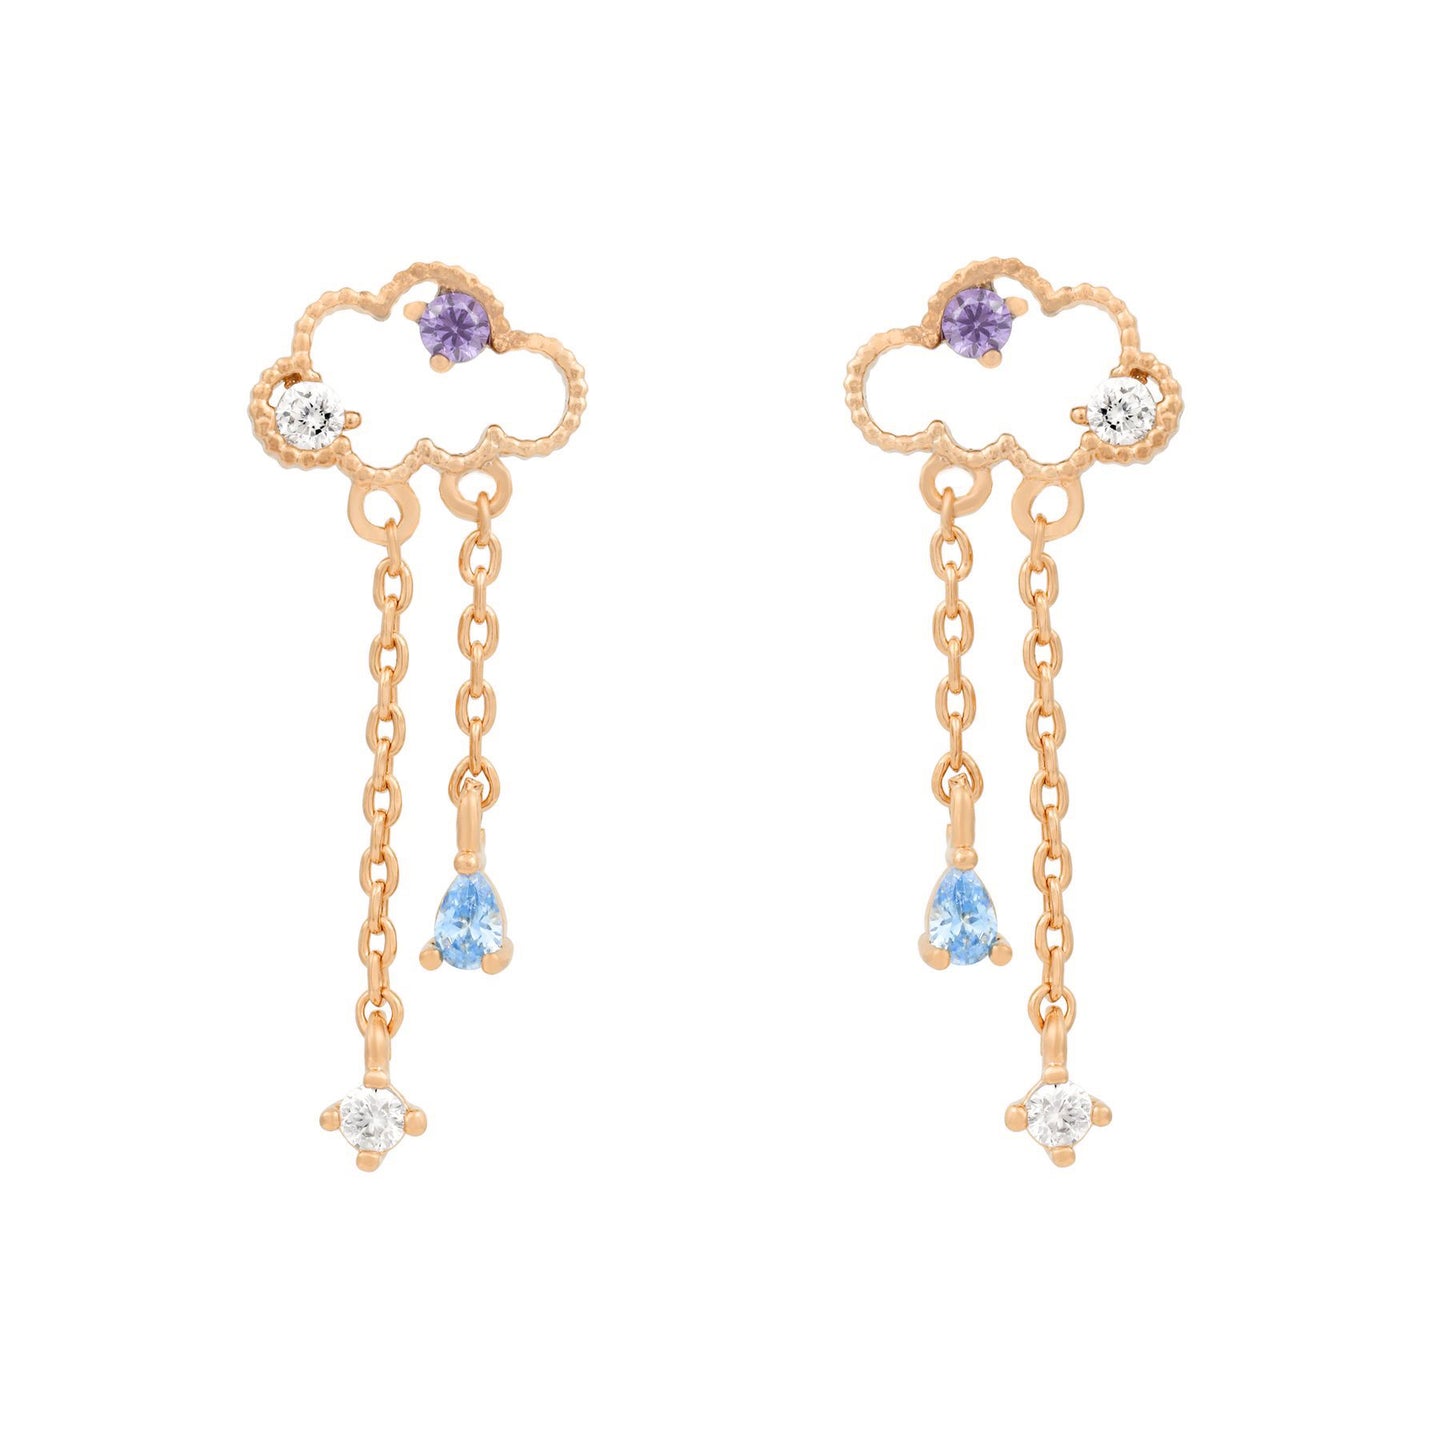 Girls Crew - Reigning Clouds Dangle Earrings - Rose Gold